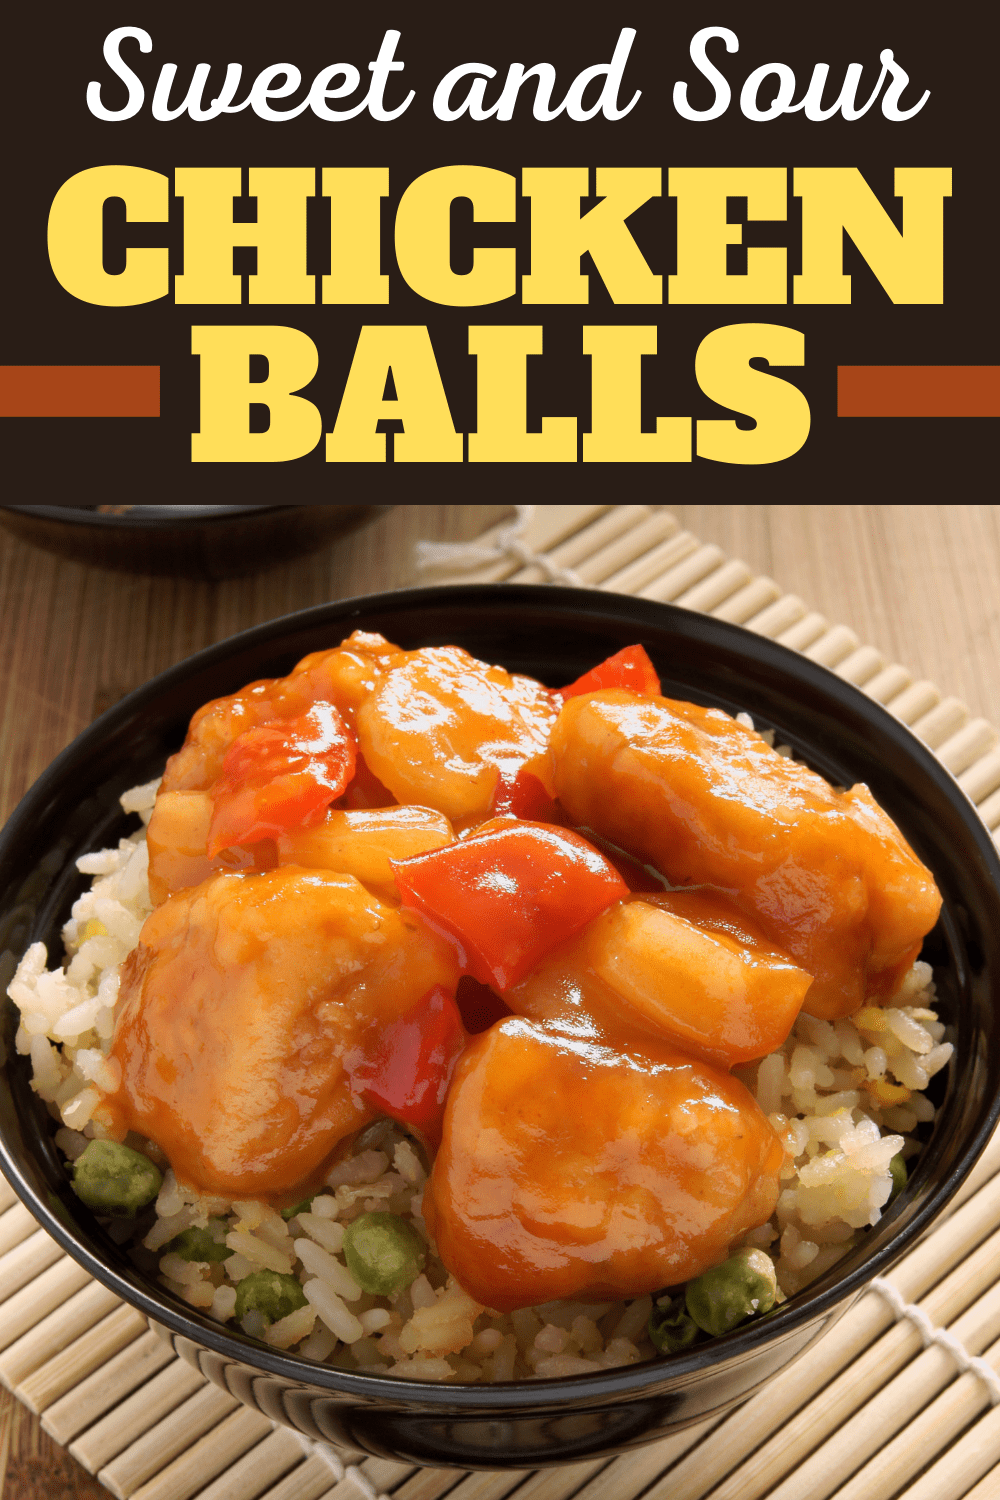 Sweet and Sour Chicken Balls - Insanely Good